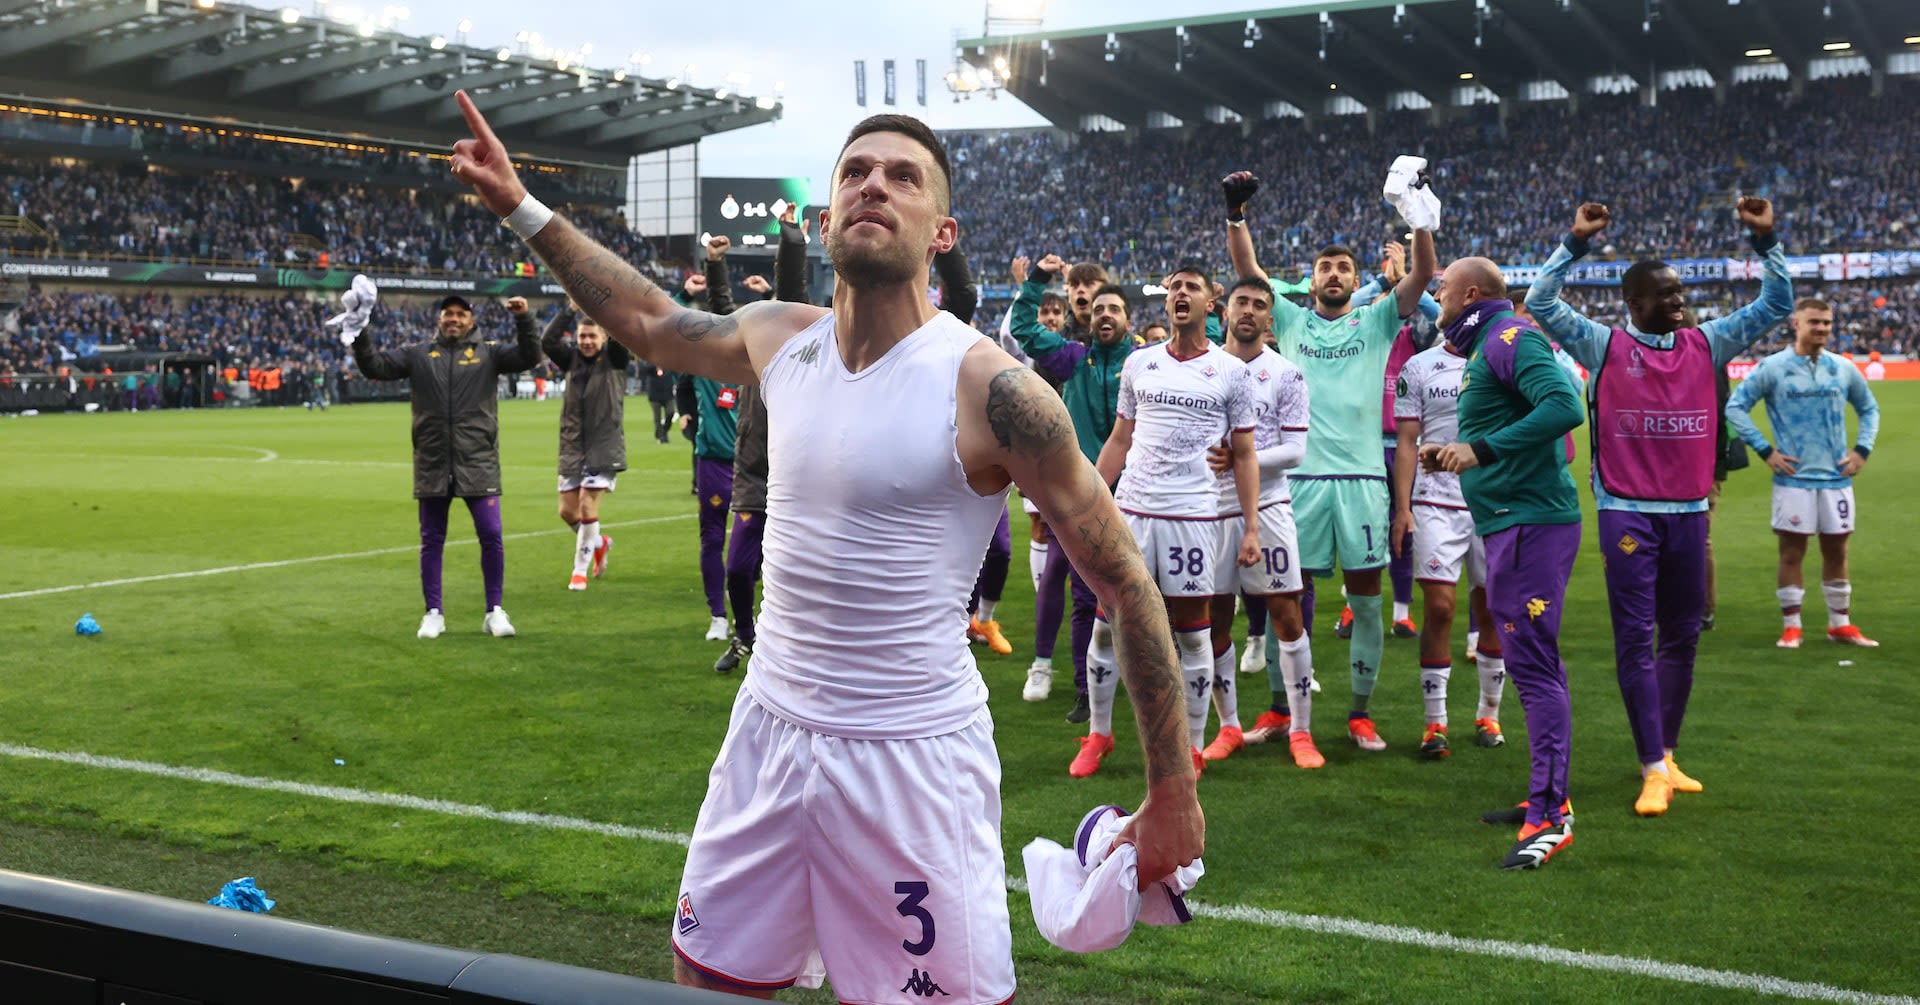 Fiorentina out for revenge and to honour Barone, says Biraghi